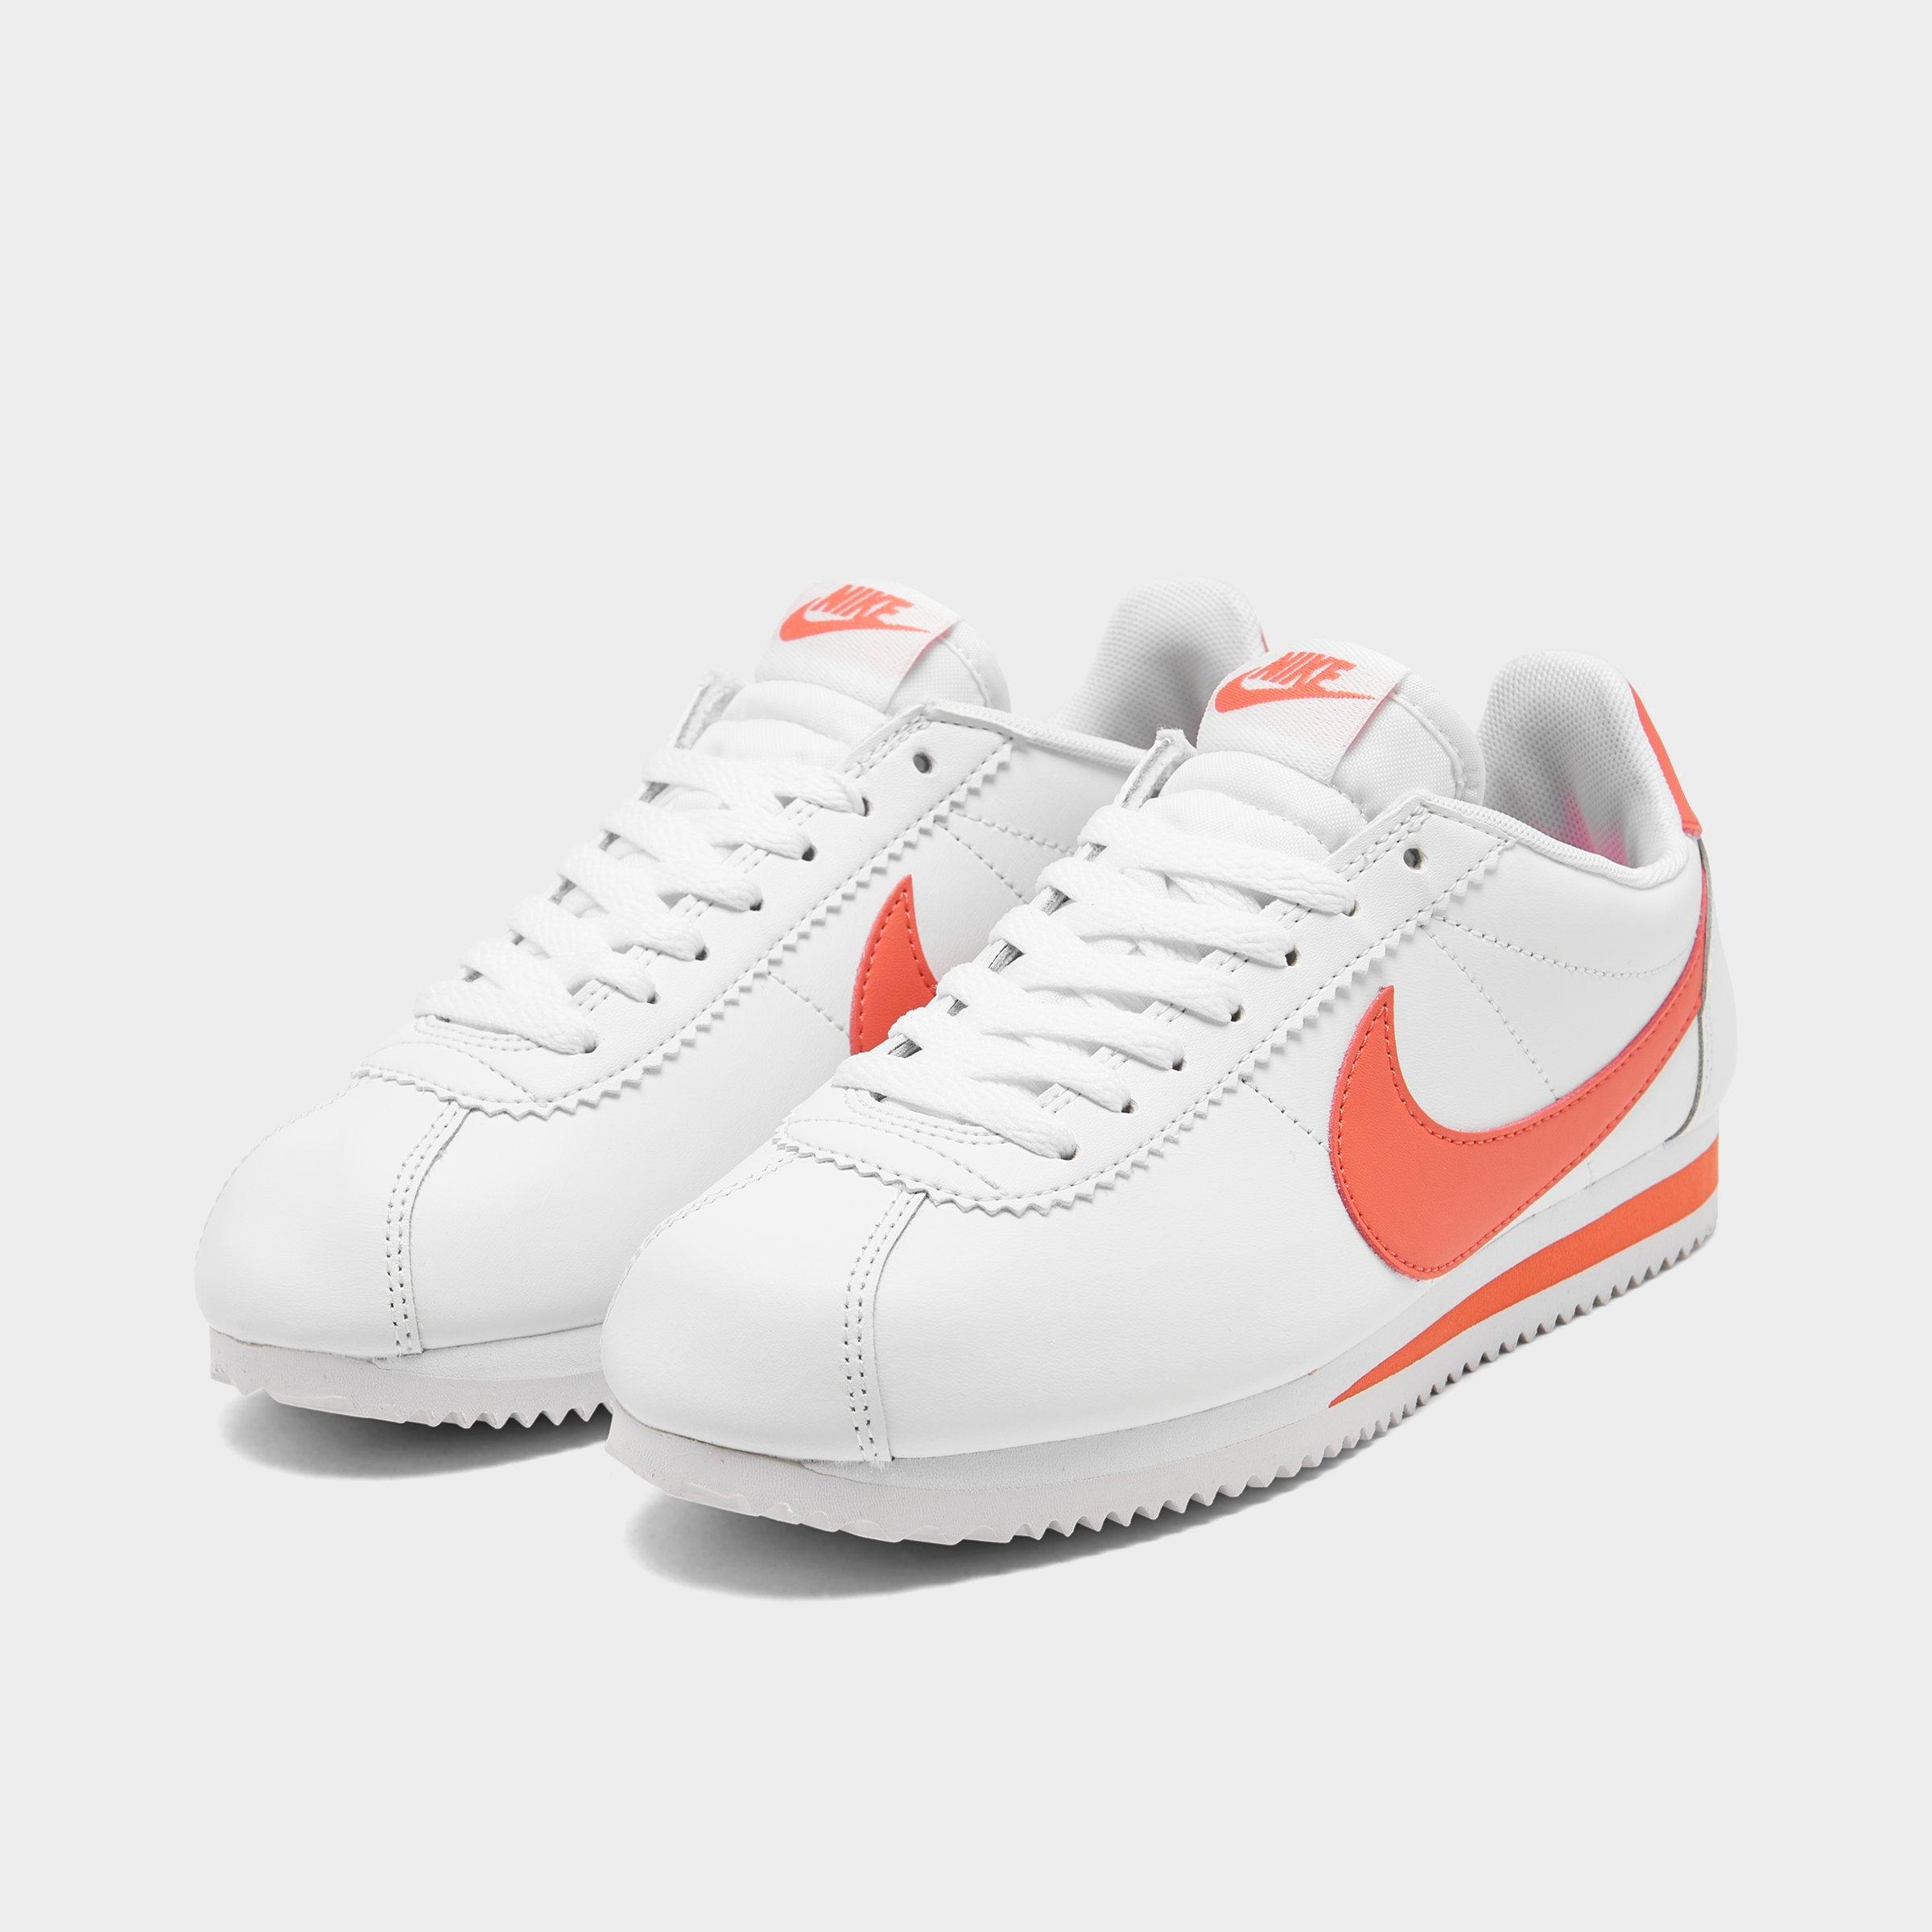 womens classic cortez leather